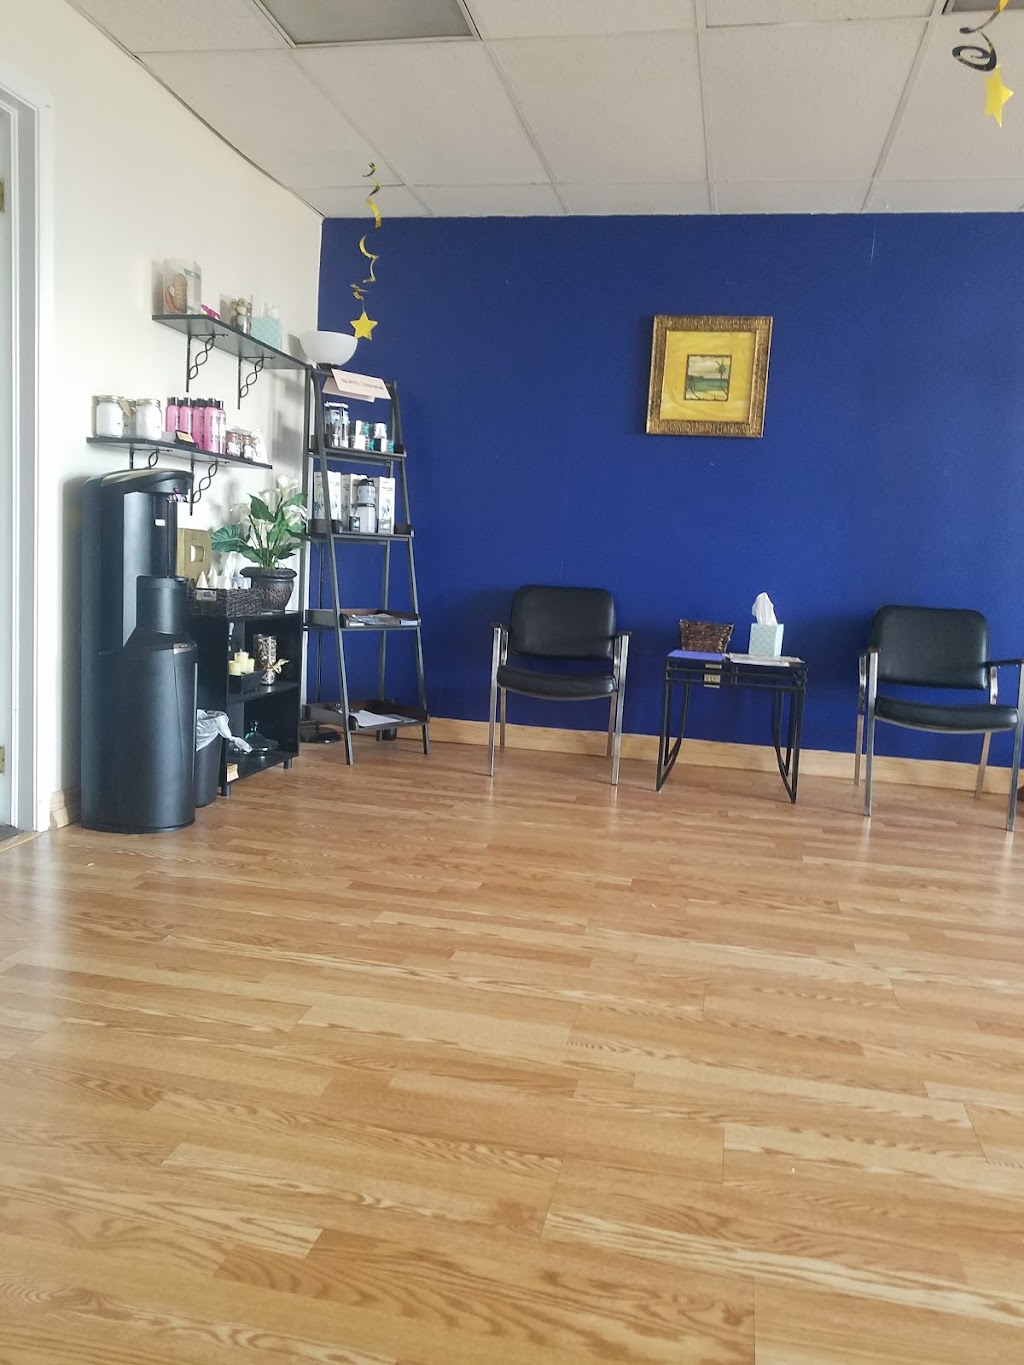 I Got Your Back Massage and Wellness Center - health  | Photo 4 of 10 | Address: 1101 Portage Trail Extension W, Akron, OH 44313, USA | Phone: (330) 247-2217